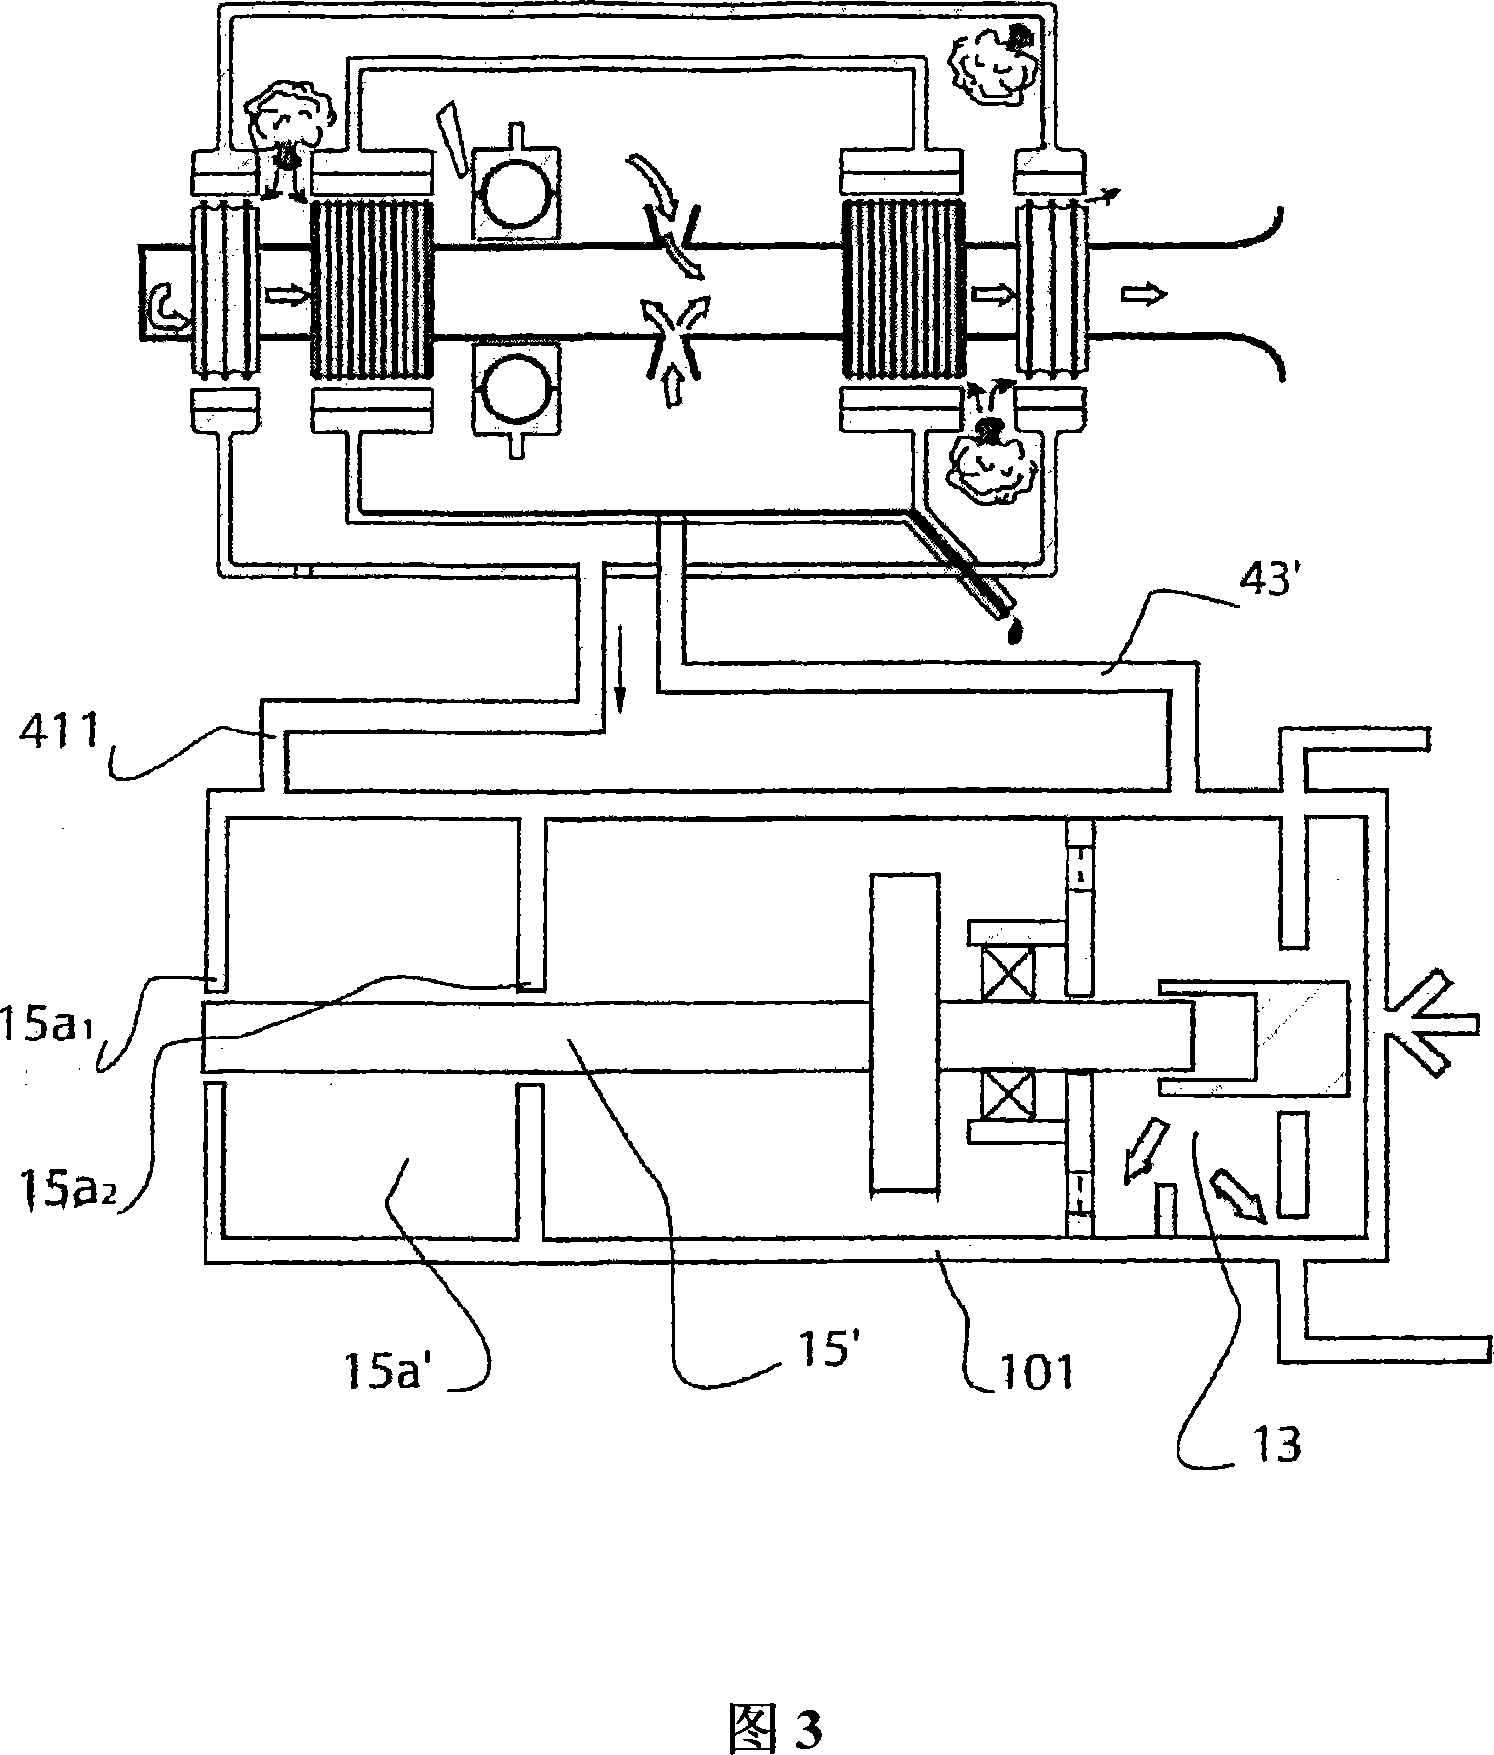 Gas turbine engine with a gearbox-mounted starter